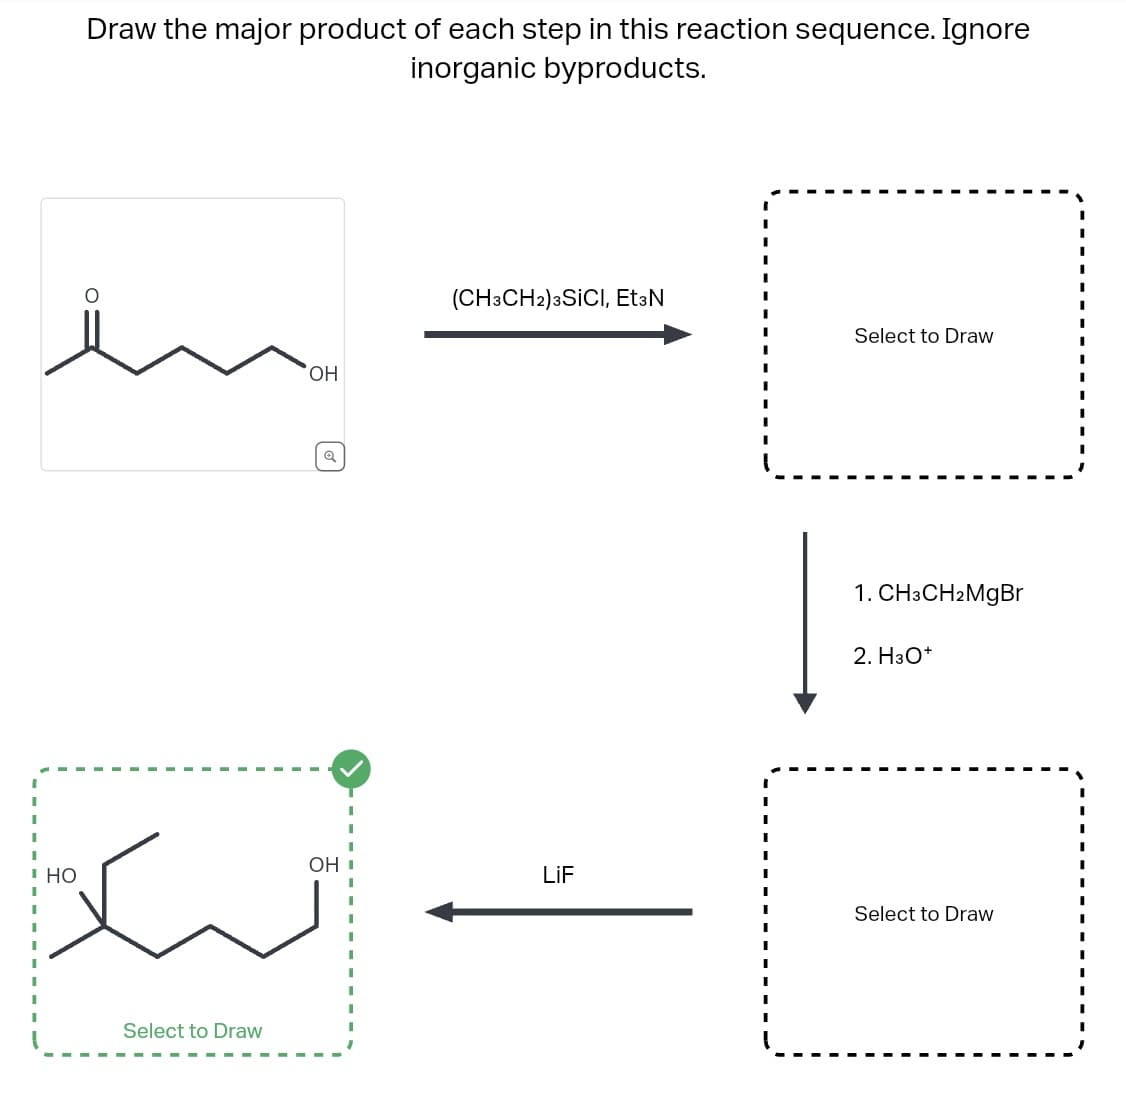 Draw the major product of each step in this reaction sequence. Ignore
inorganic byproducts.
HO
OH
Select to Draw
[
ت گیاه
(CH3CH2) 3SICI, Et3N
OH I
Select to Draw
1. CH3CH2MgBr
2. H3O+
Select to Draw
.
.
.